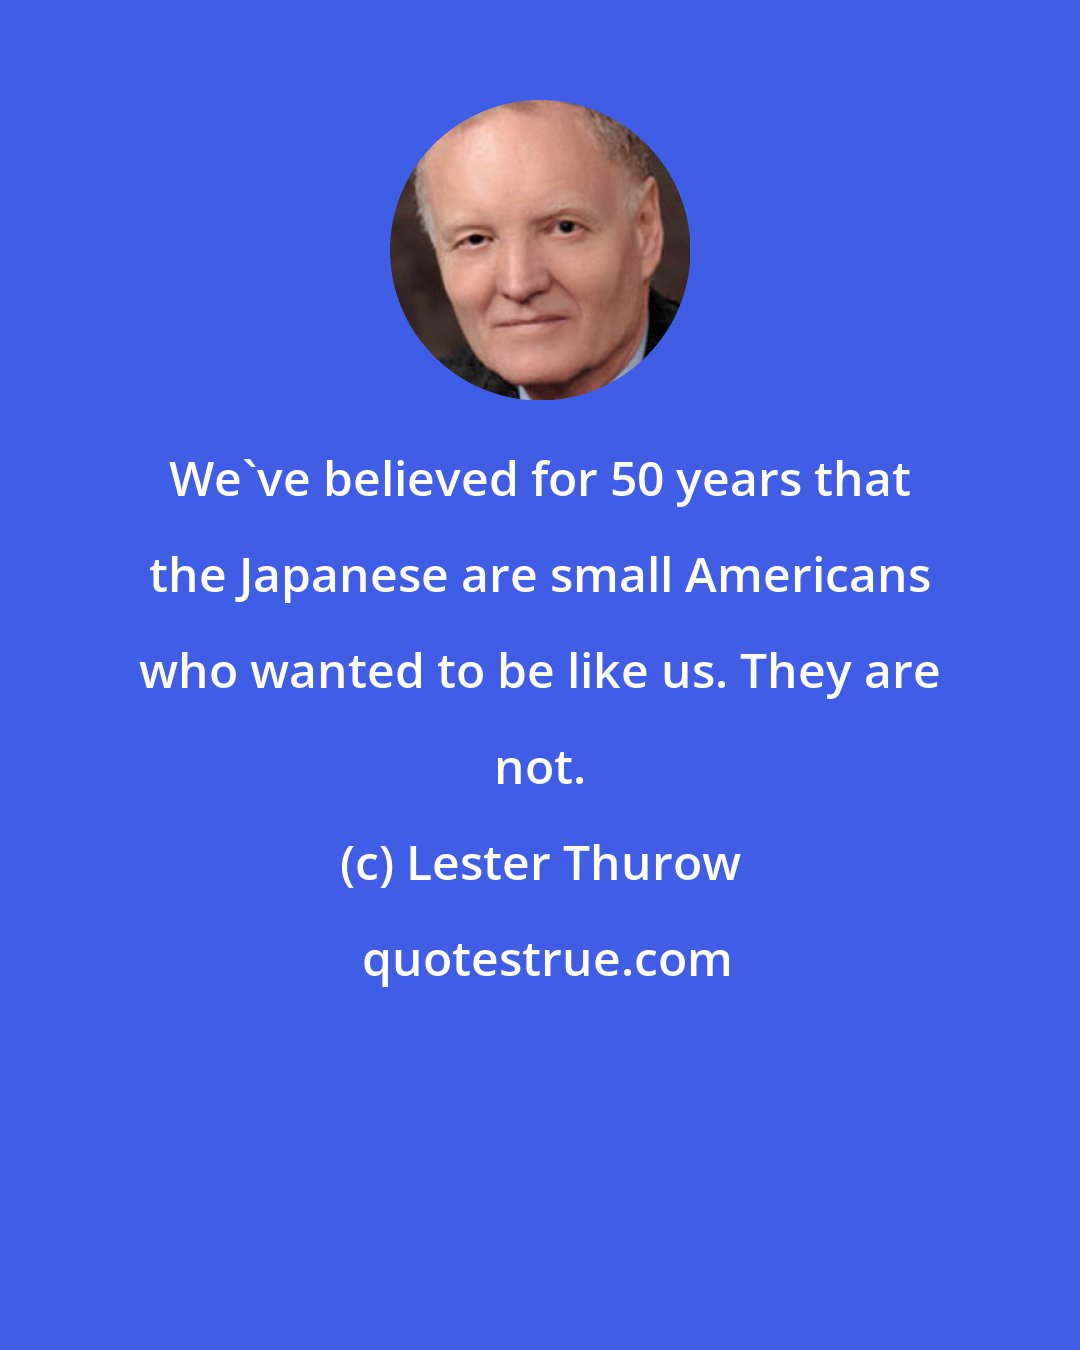 Lester Thurow: We've believed for 50 years that the Japanese are small Americans who wanted to be like us. They are not.